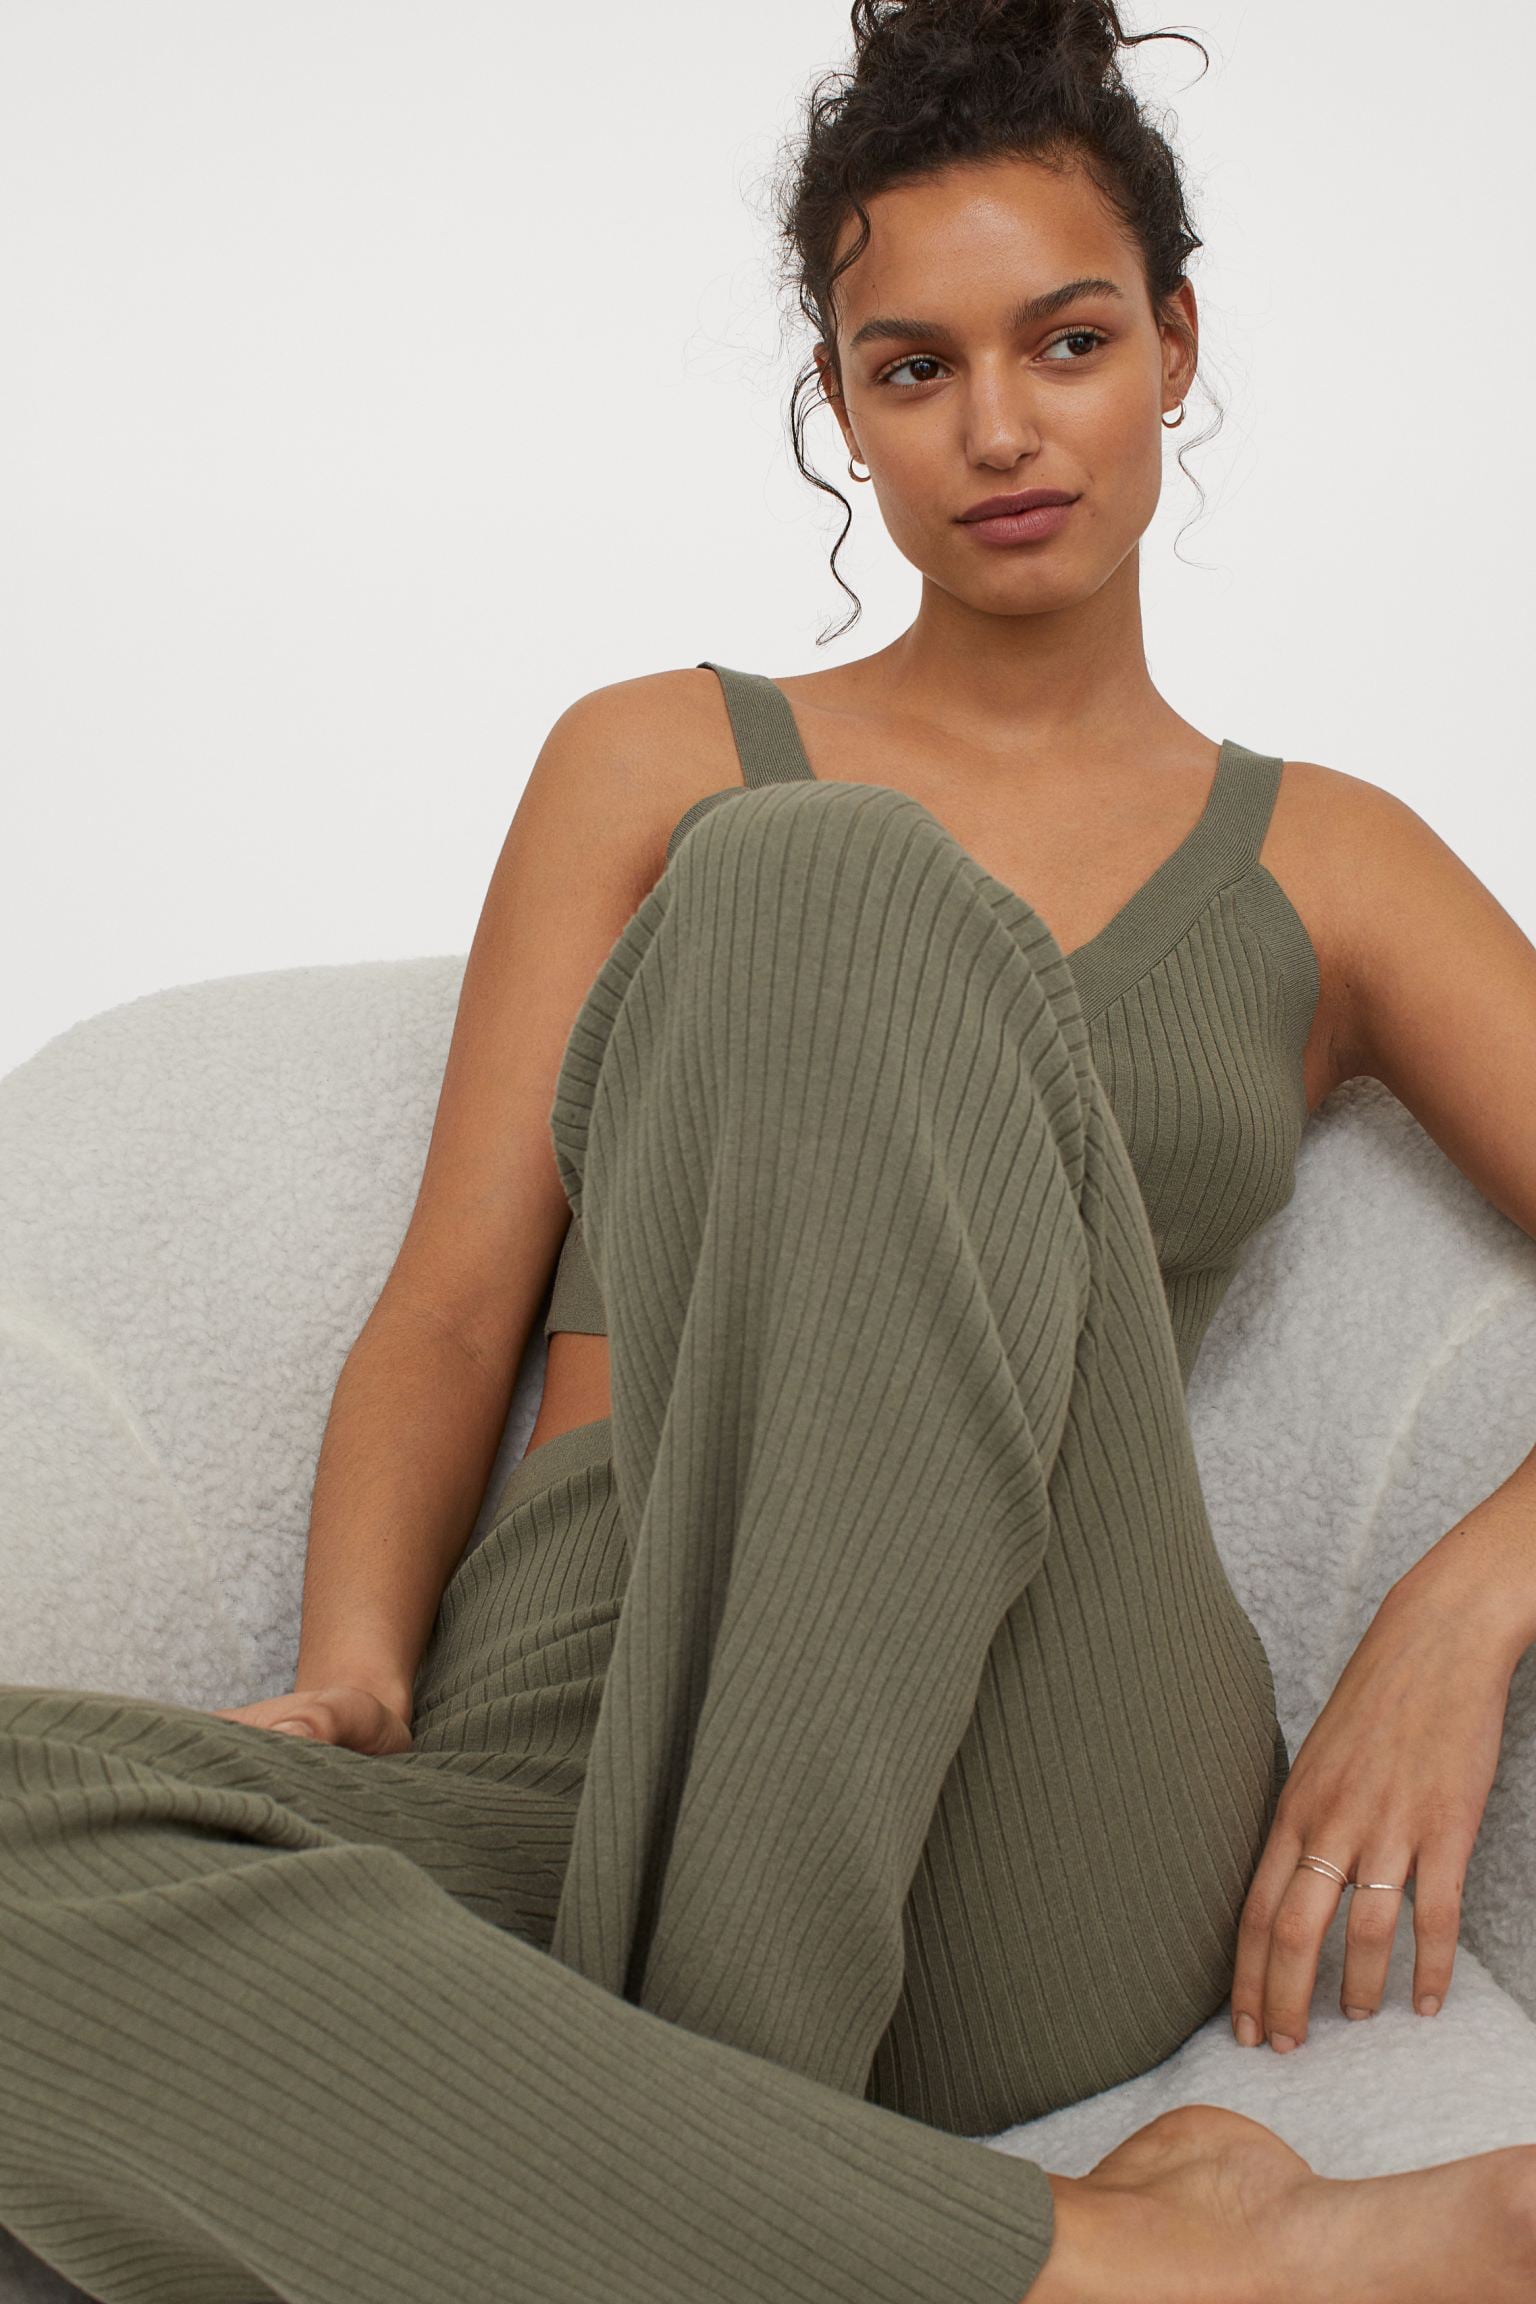 Best and Most Comfortable Lounge Pants For Women 2021